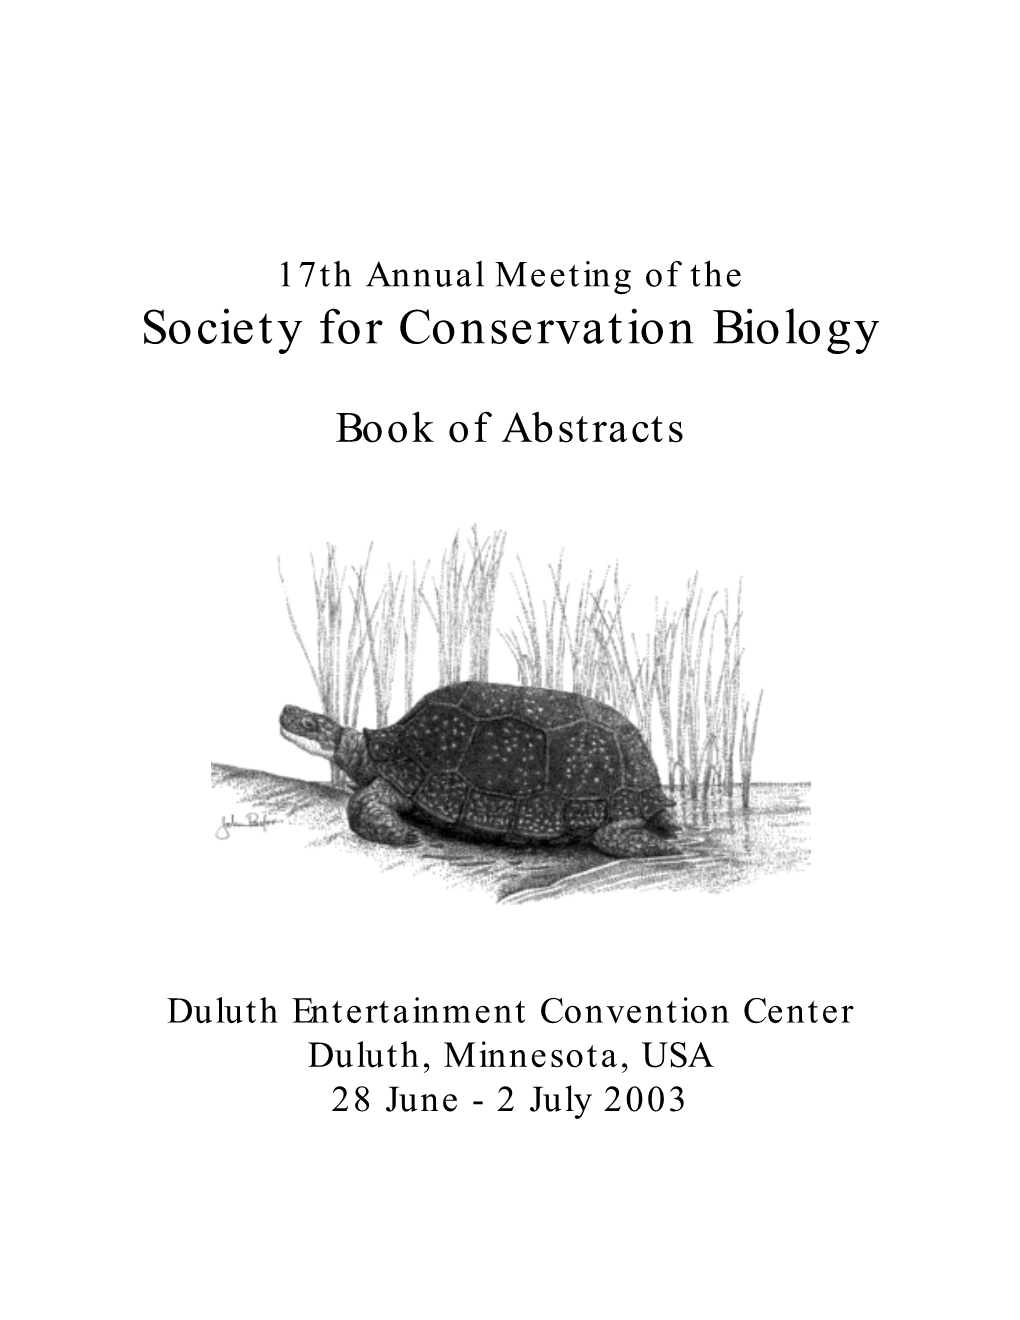 Society for Conservation Biology Annual Meeting